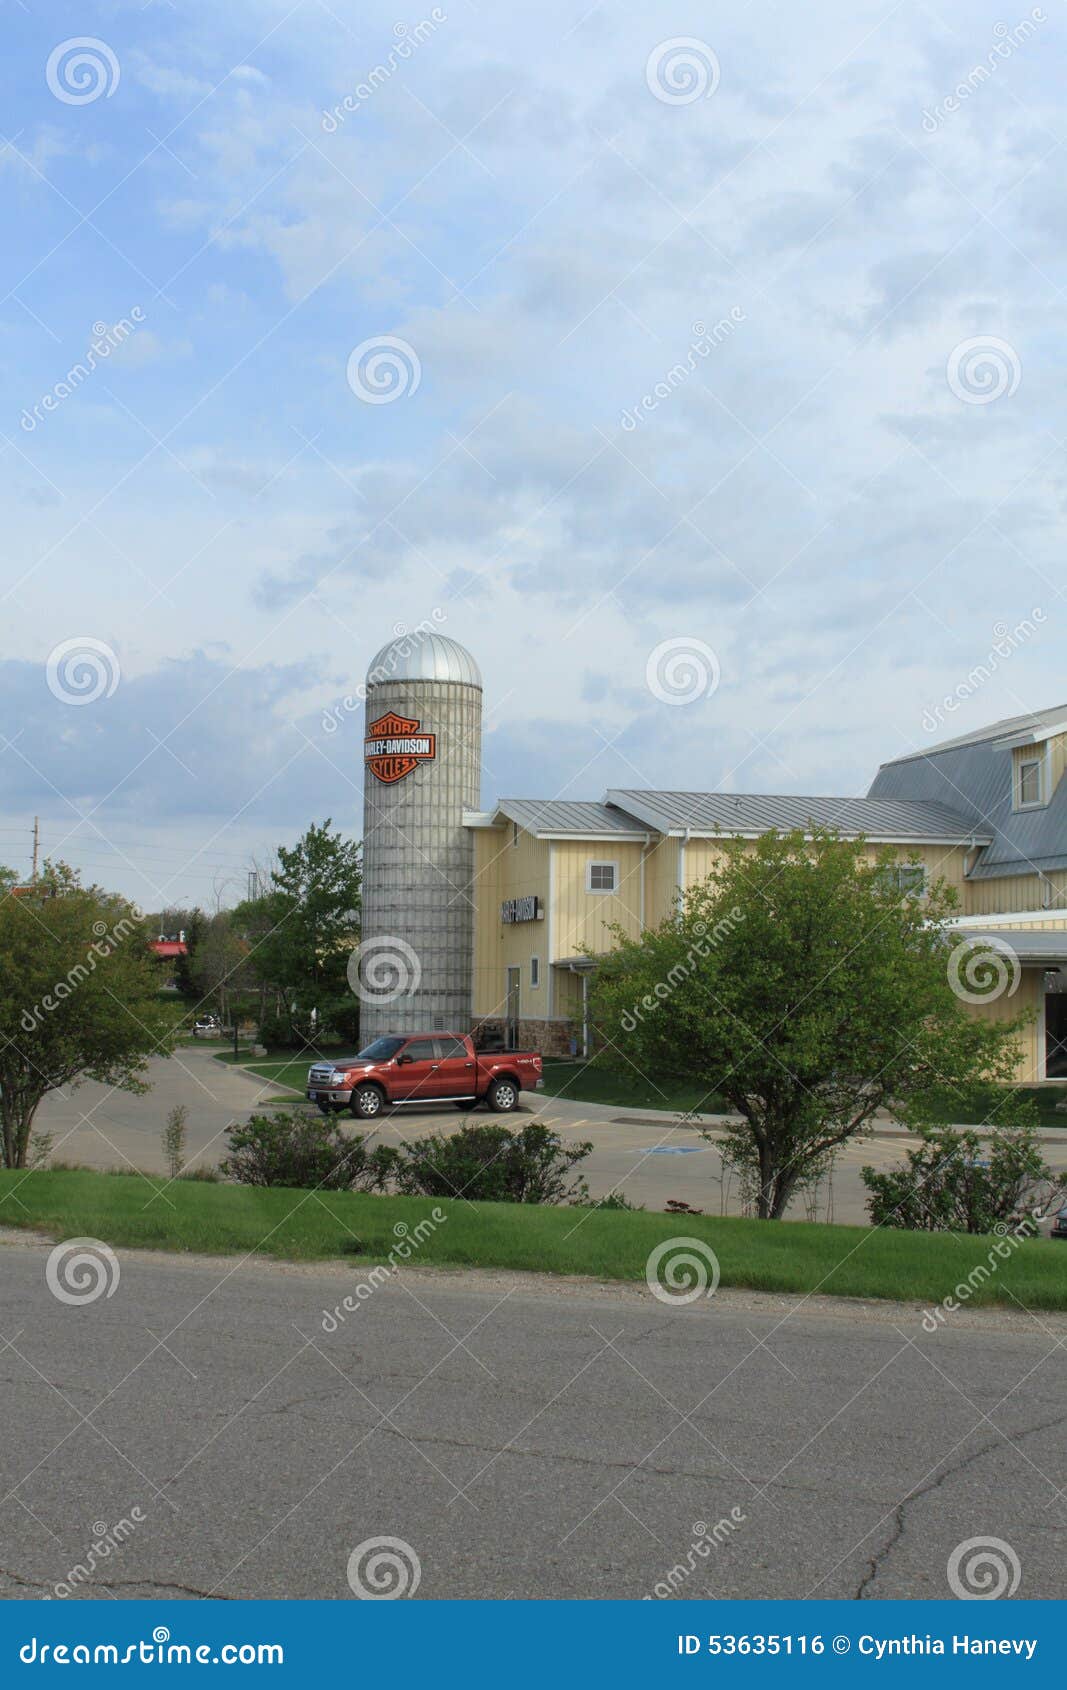 Harley Davidson Silo Des Moines Iowa Editorial Photo Image Of Harley Clouds 53635116